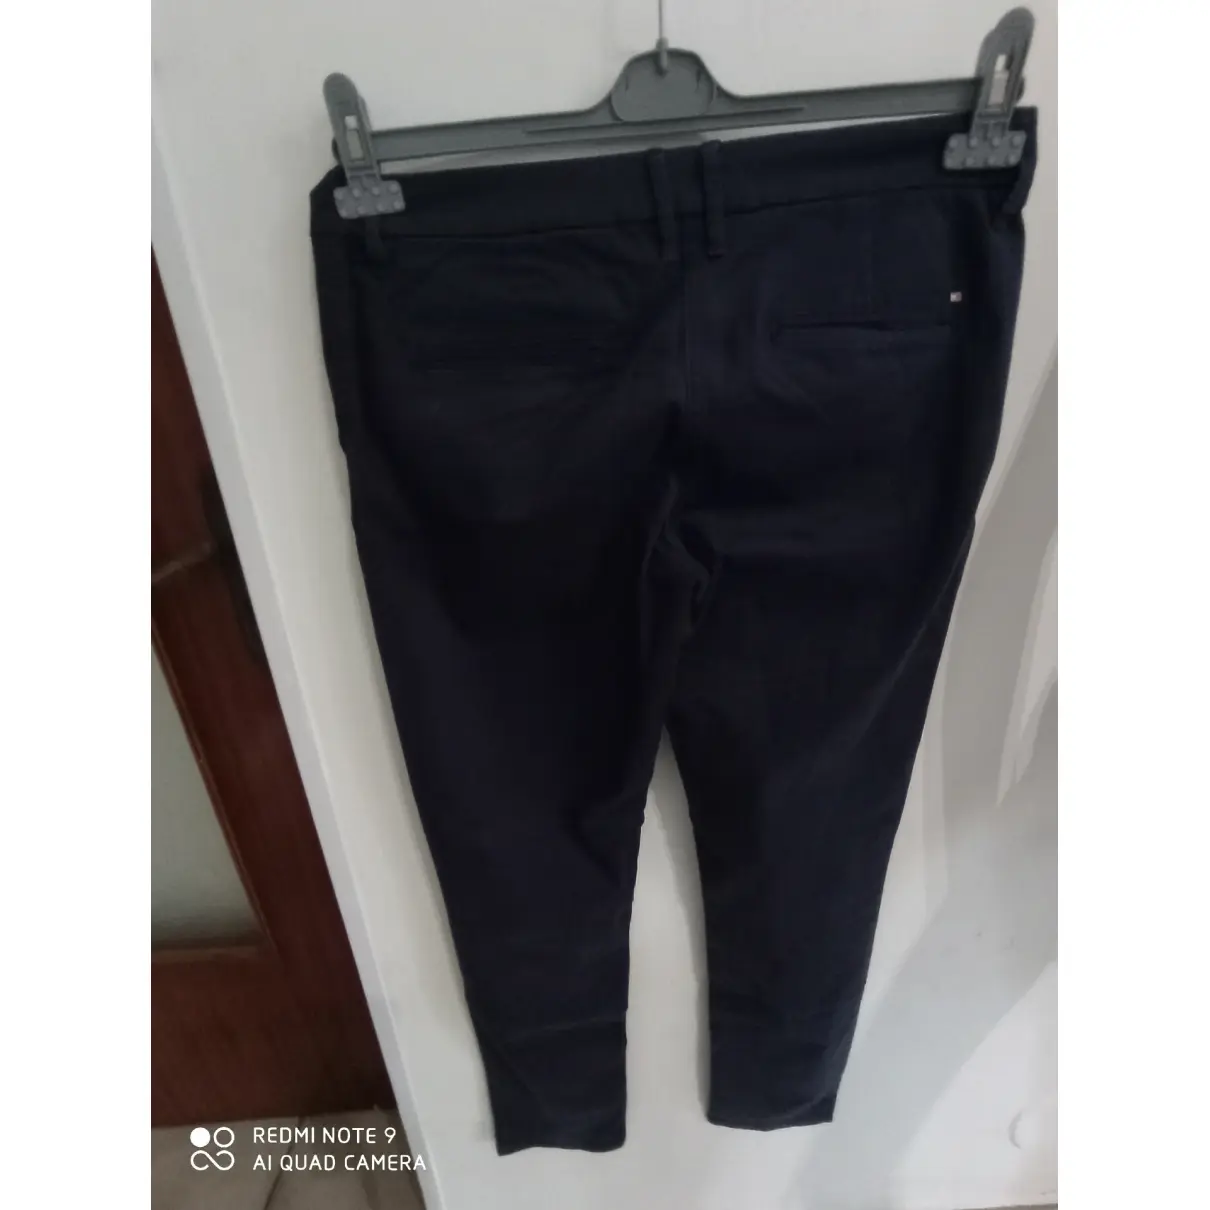 Buy Tommy Hilfiger Trousers online